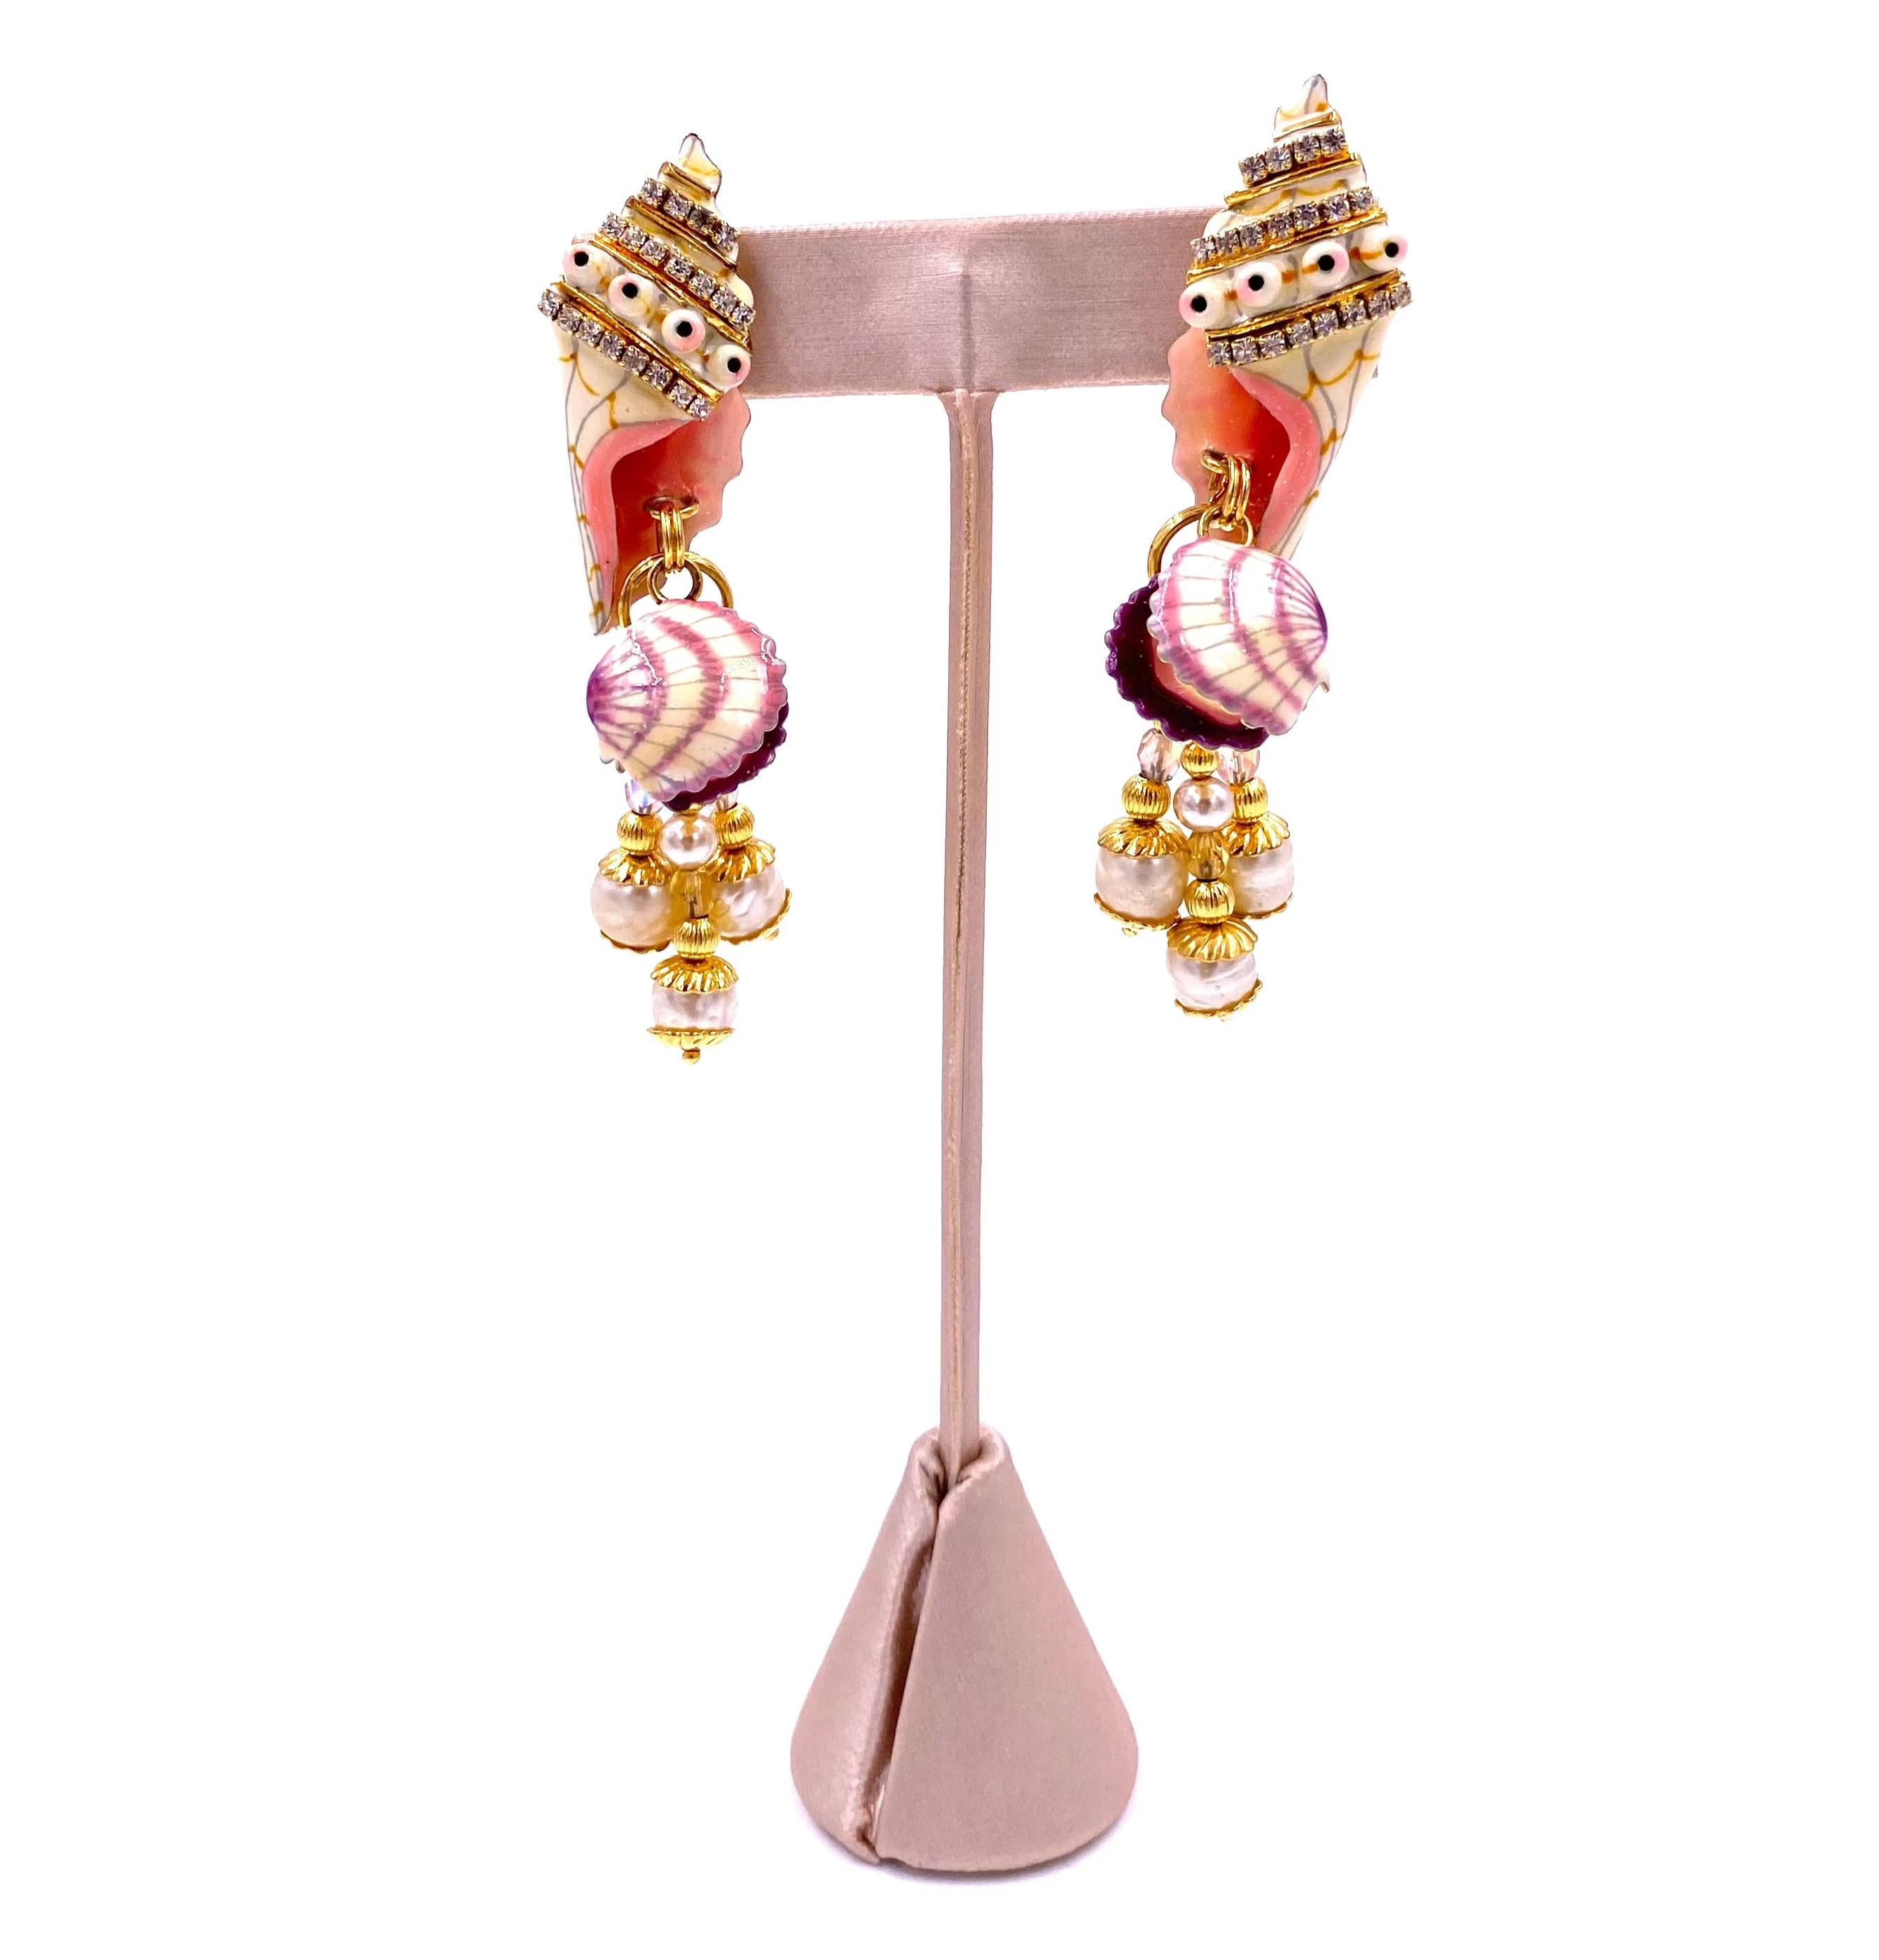 Add some beachy flair to your outfit with the Lunch at the Ritz Clamdigger earrings! These playful pink and purple seashell and clam designs are elevated with pearlescent beads and gold closures. Perfect for a fun and unique touch to any